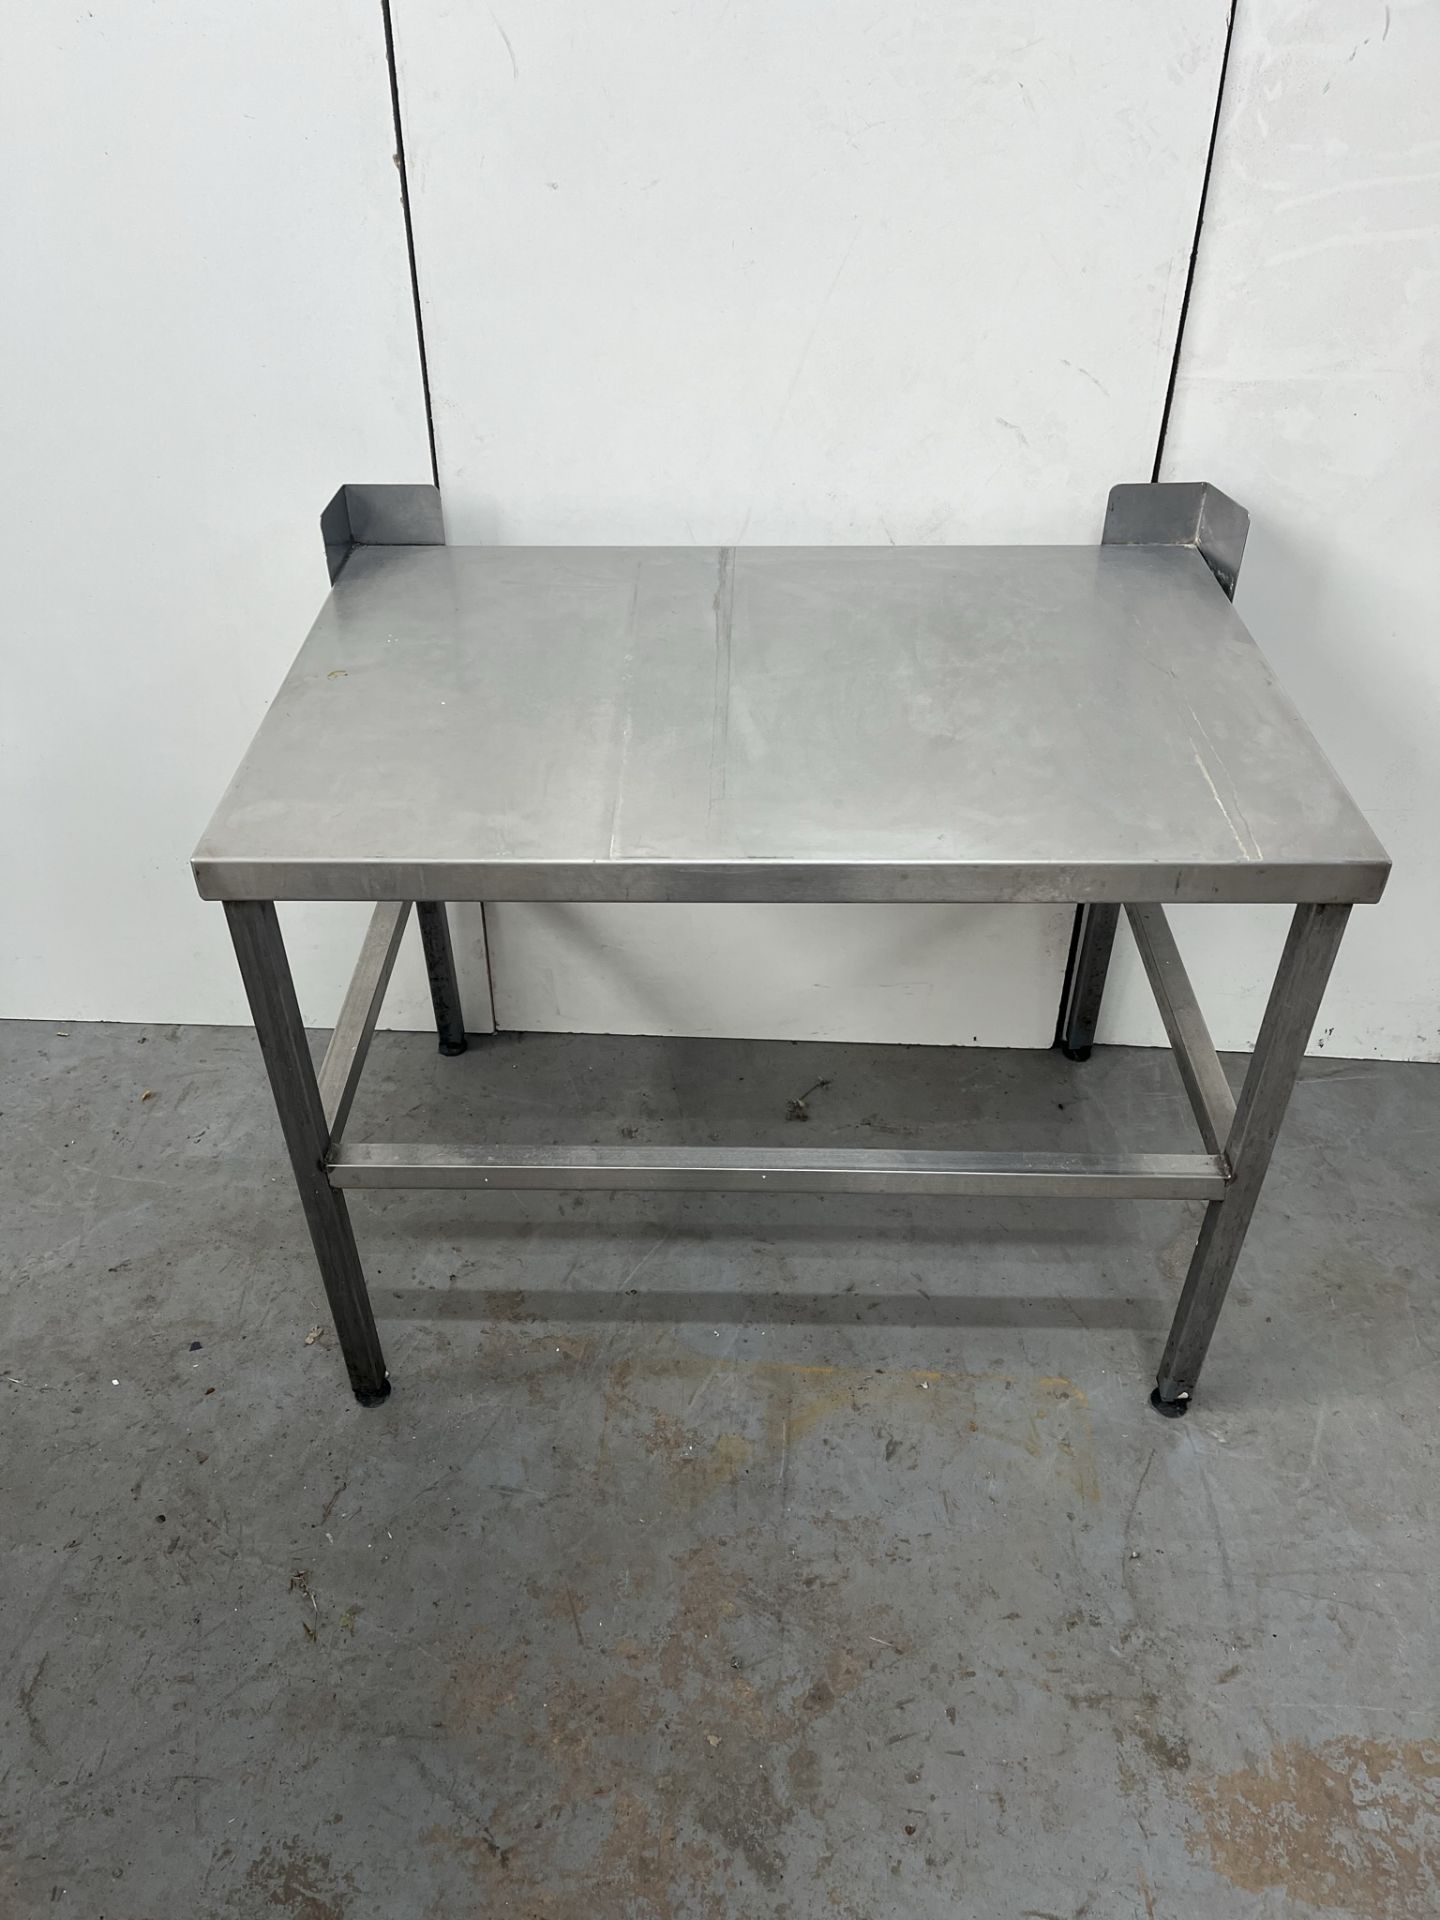 900mm Stainless Steel Catering Preperation Table - Image 2 of 4